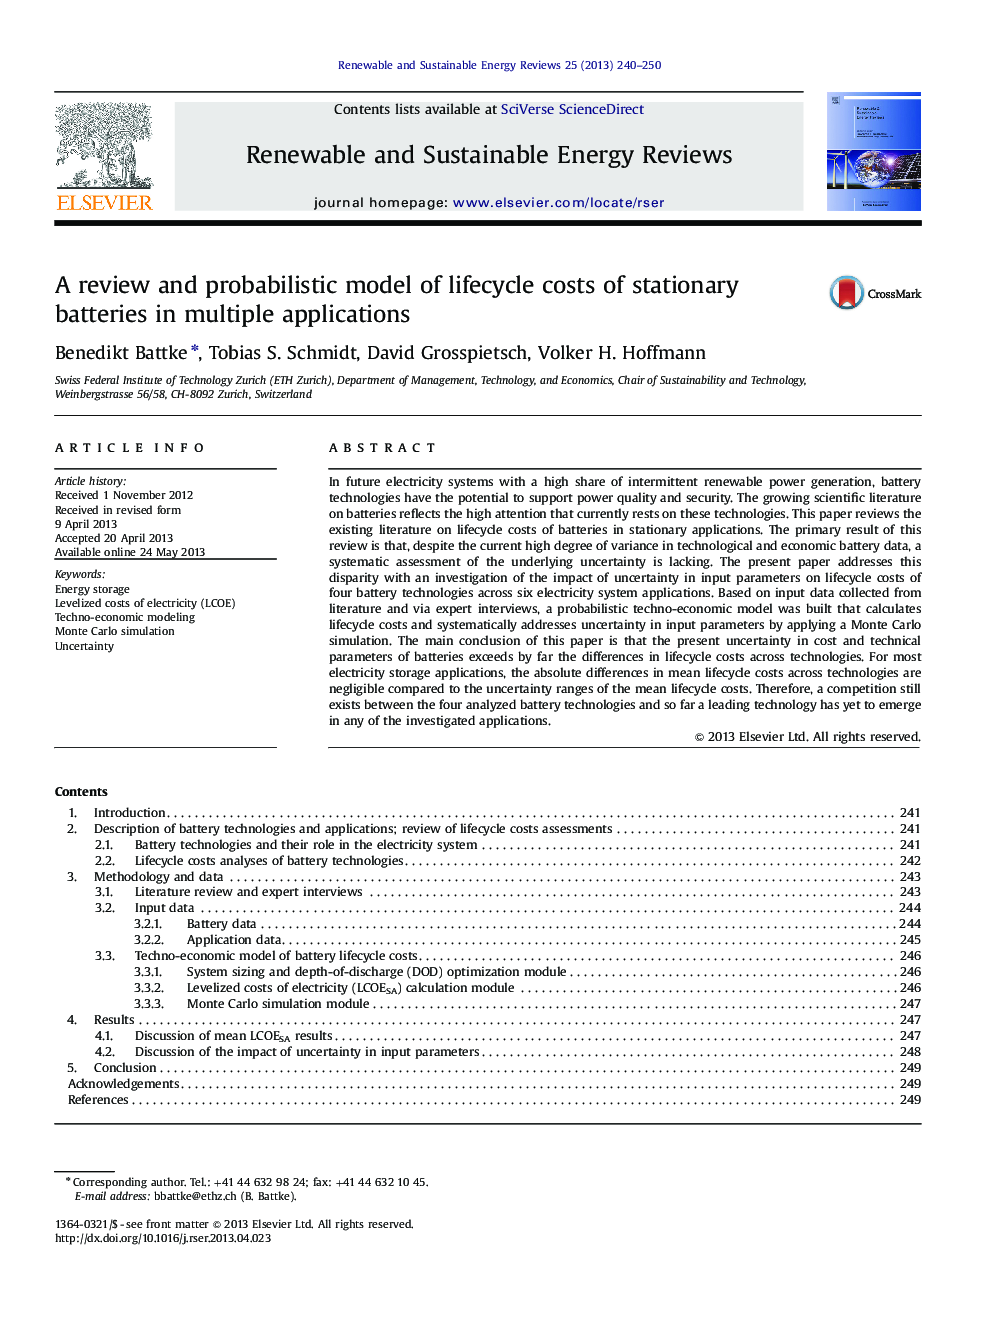 A review and probabilistic model of lifecycle costs of stationary batteries in multiple applications